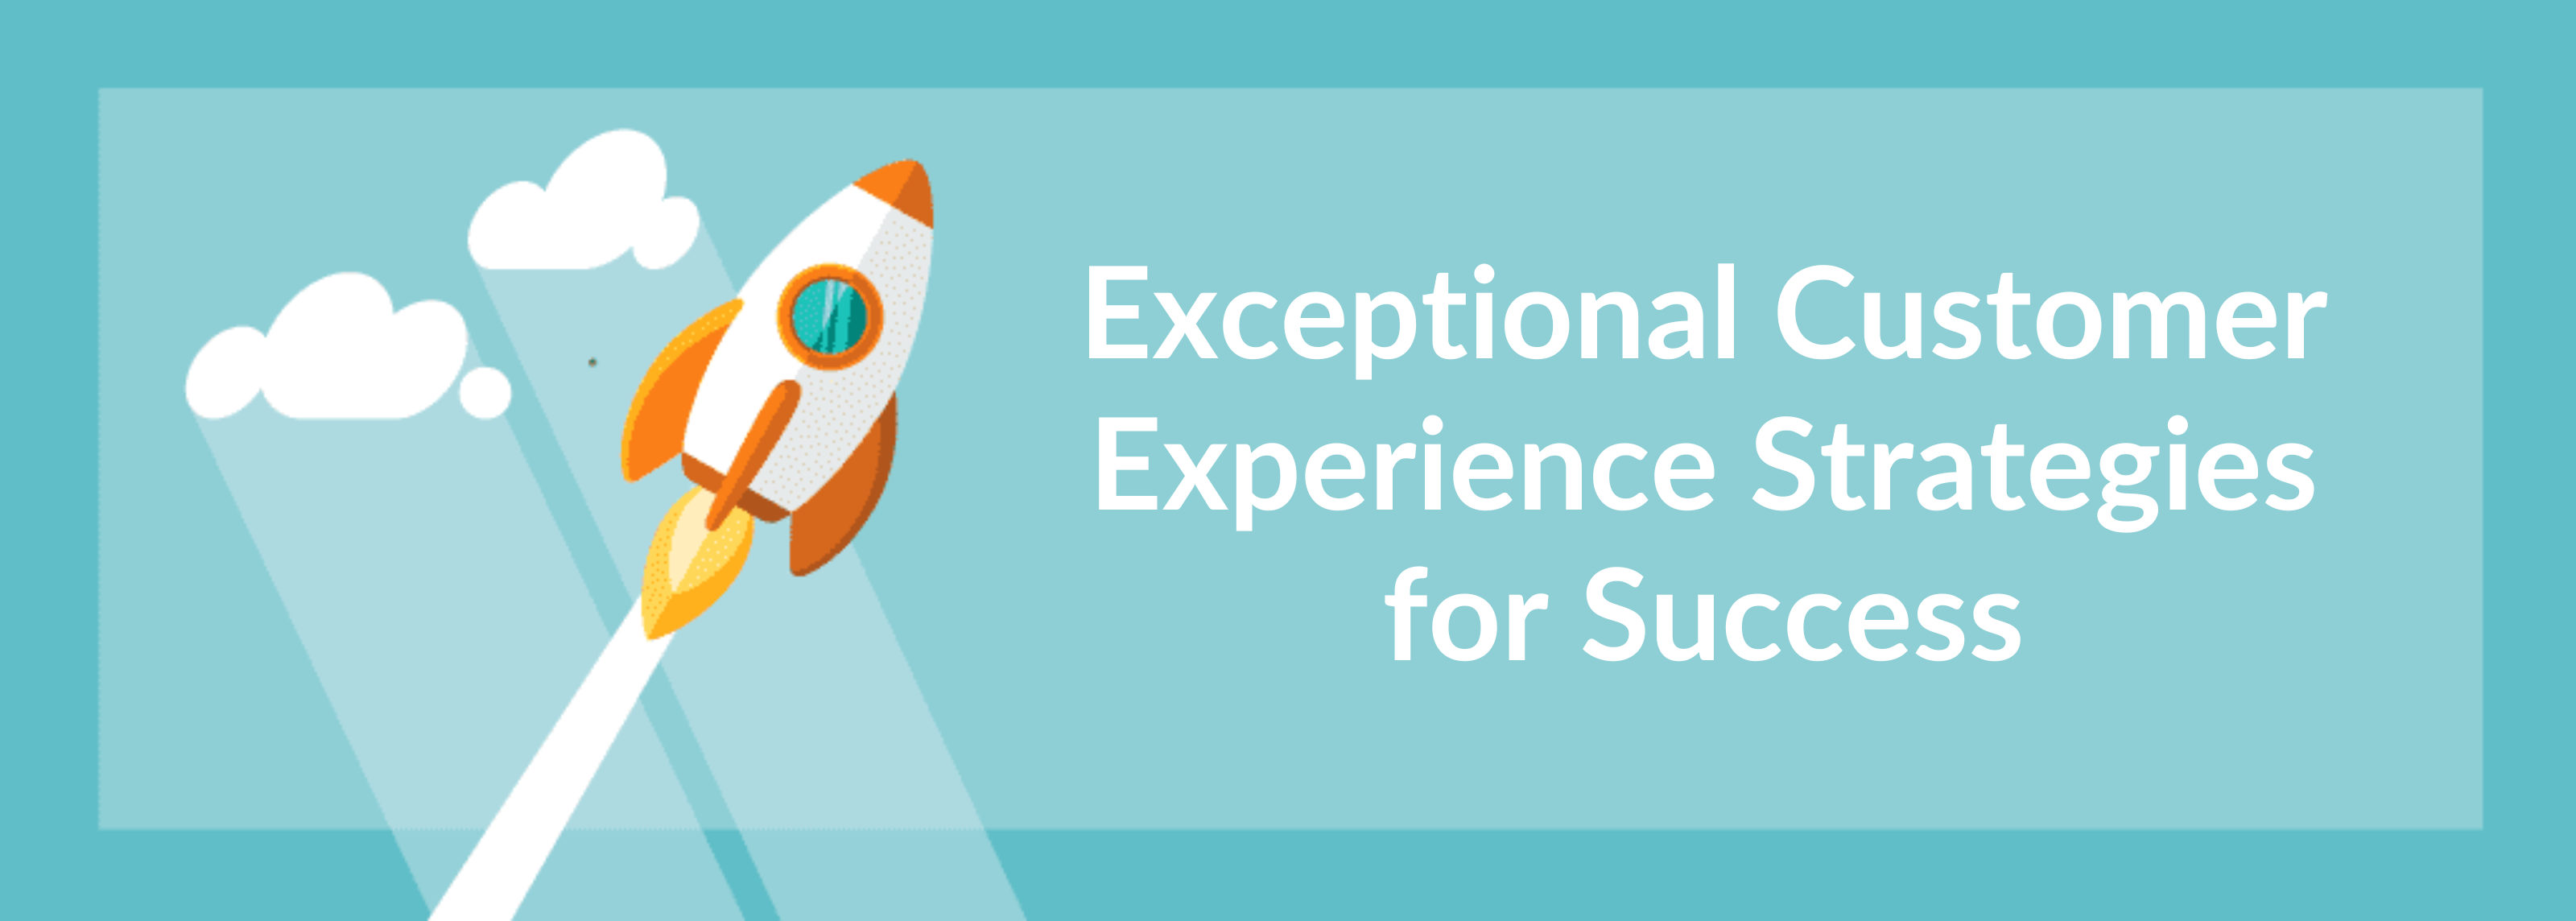 Exceptional Customer Experience Strategies for Success